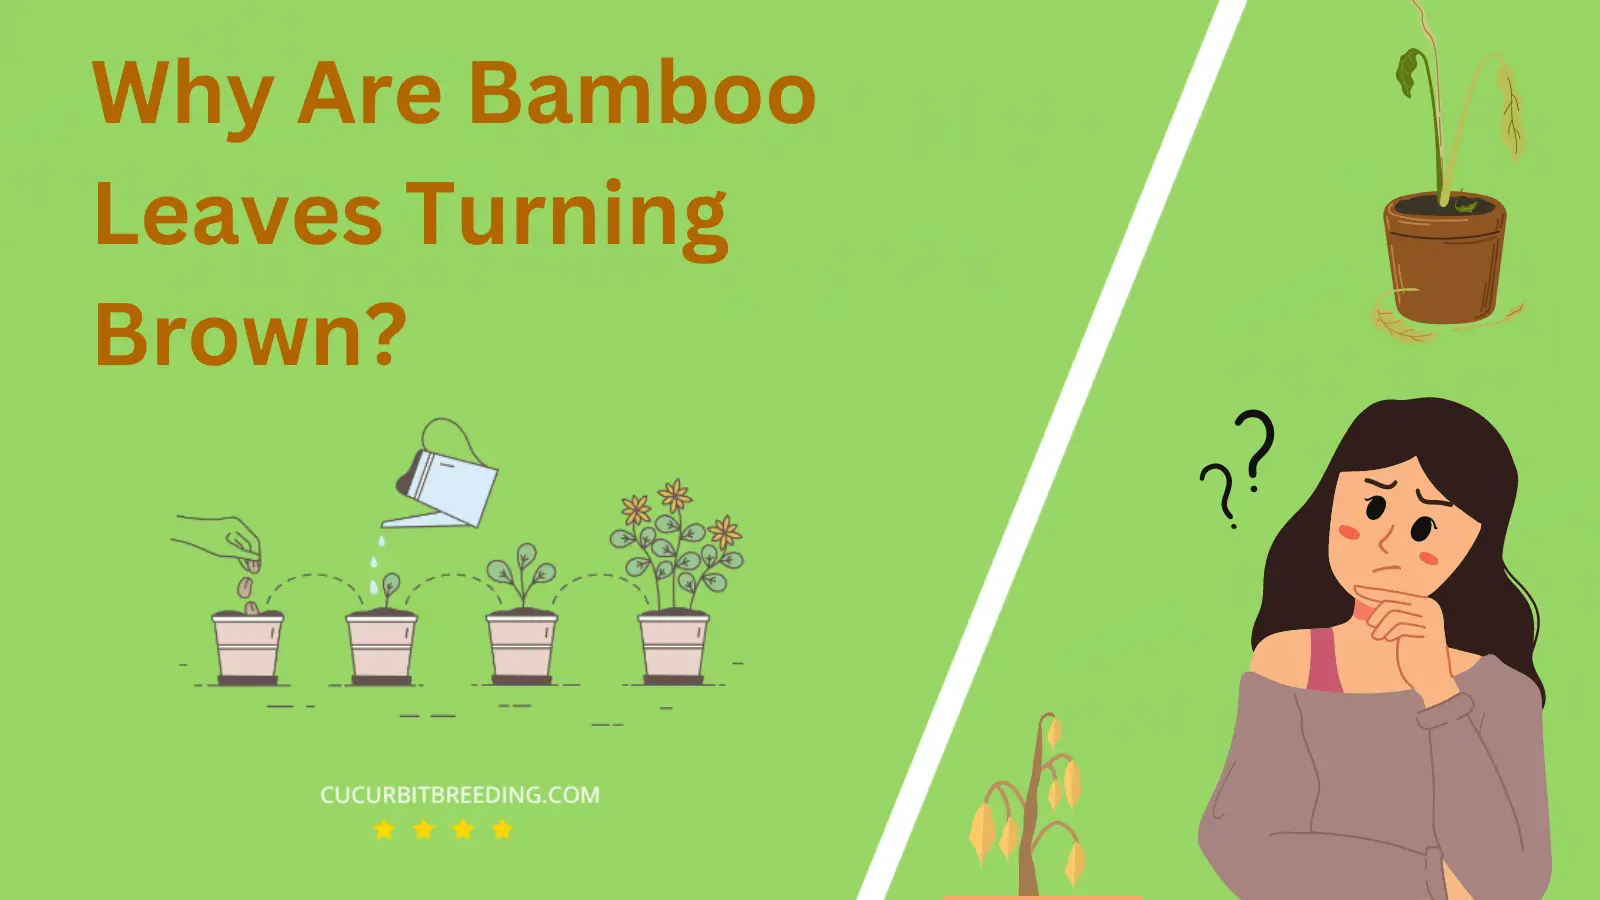 Why Are Bamboo Leaves Turning Brown